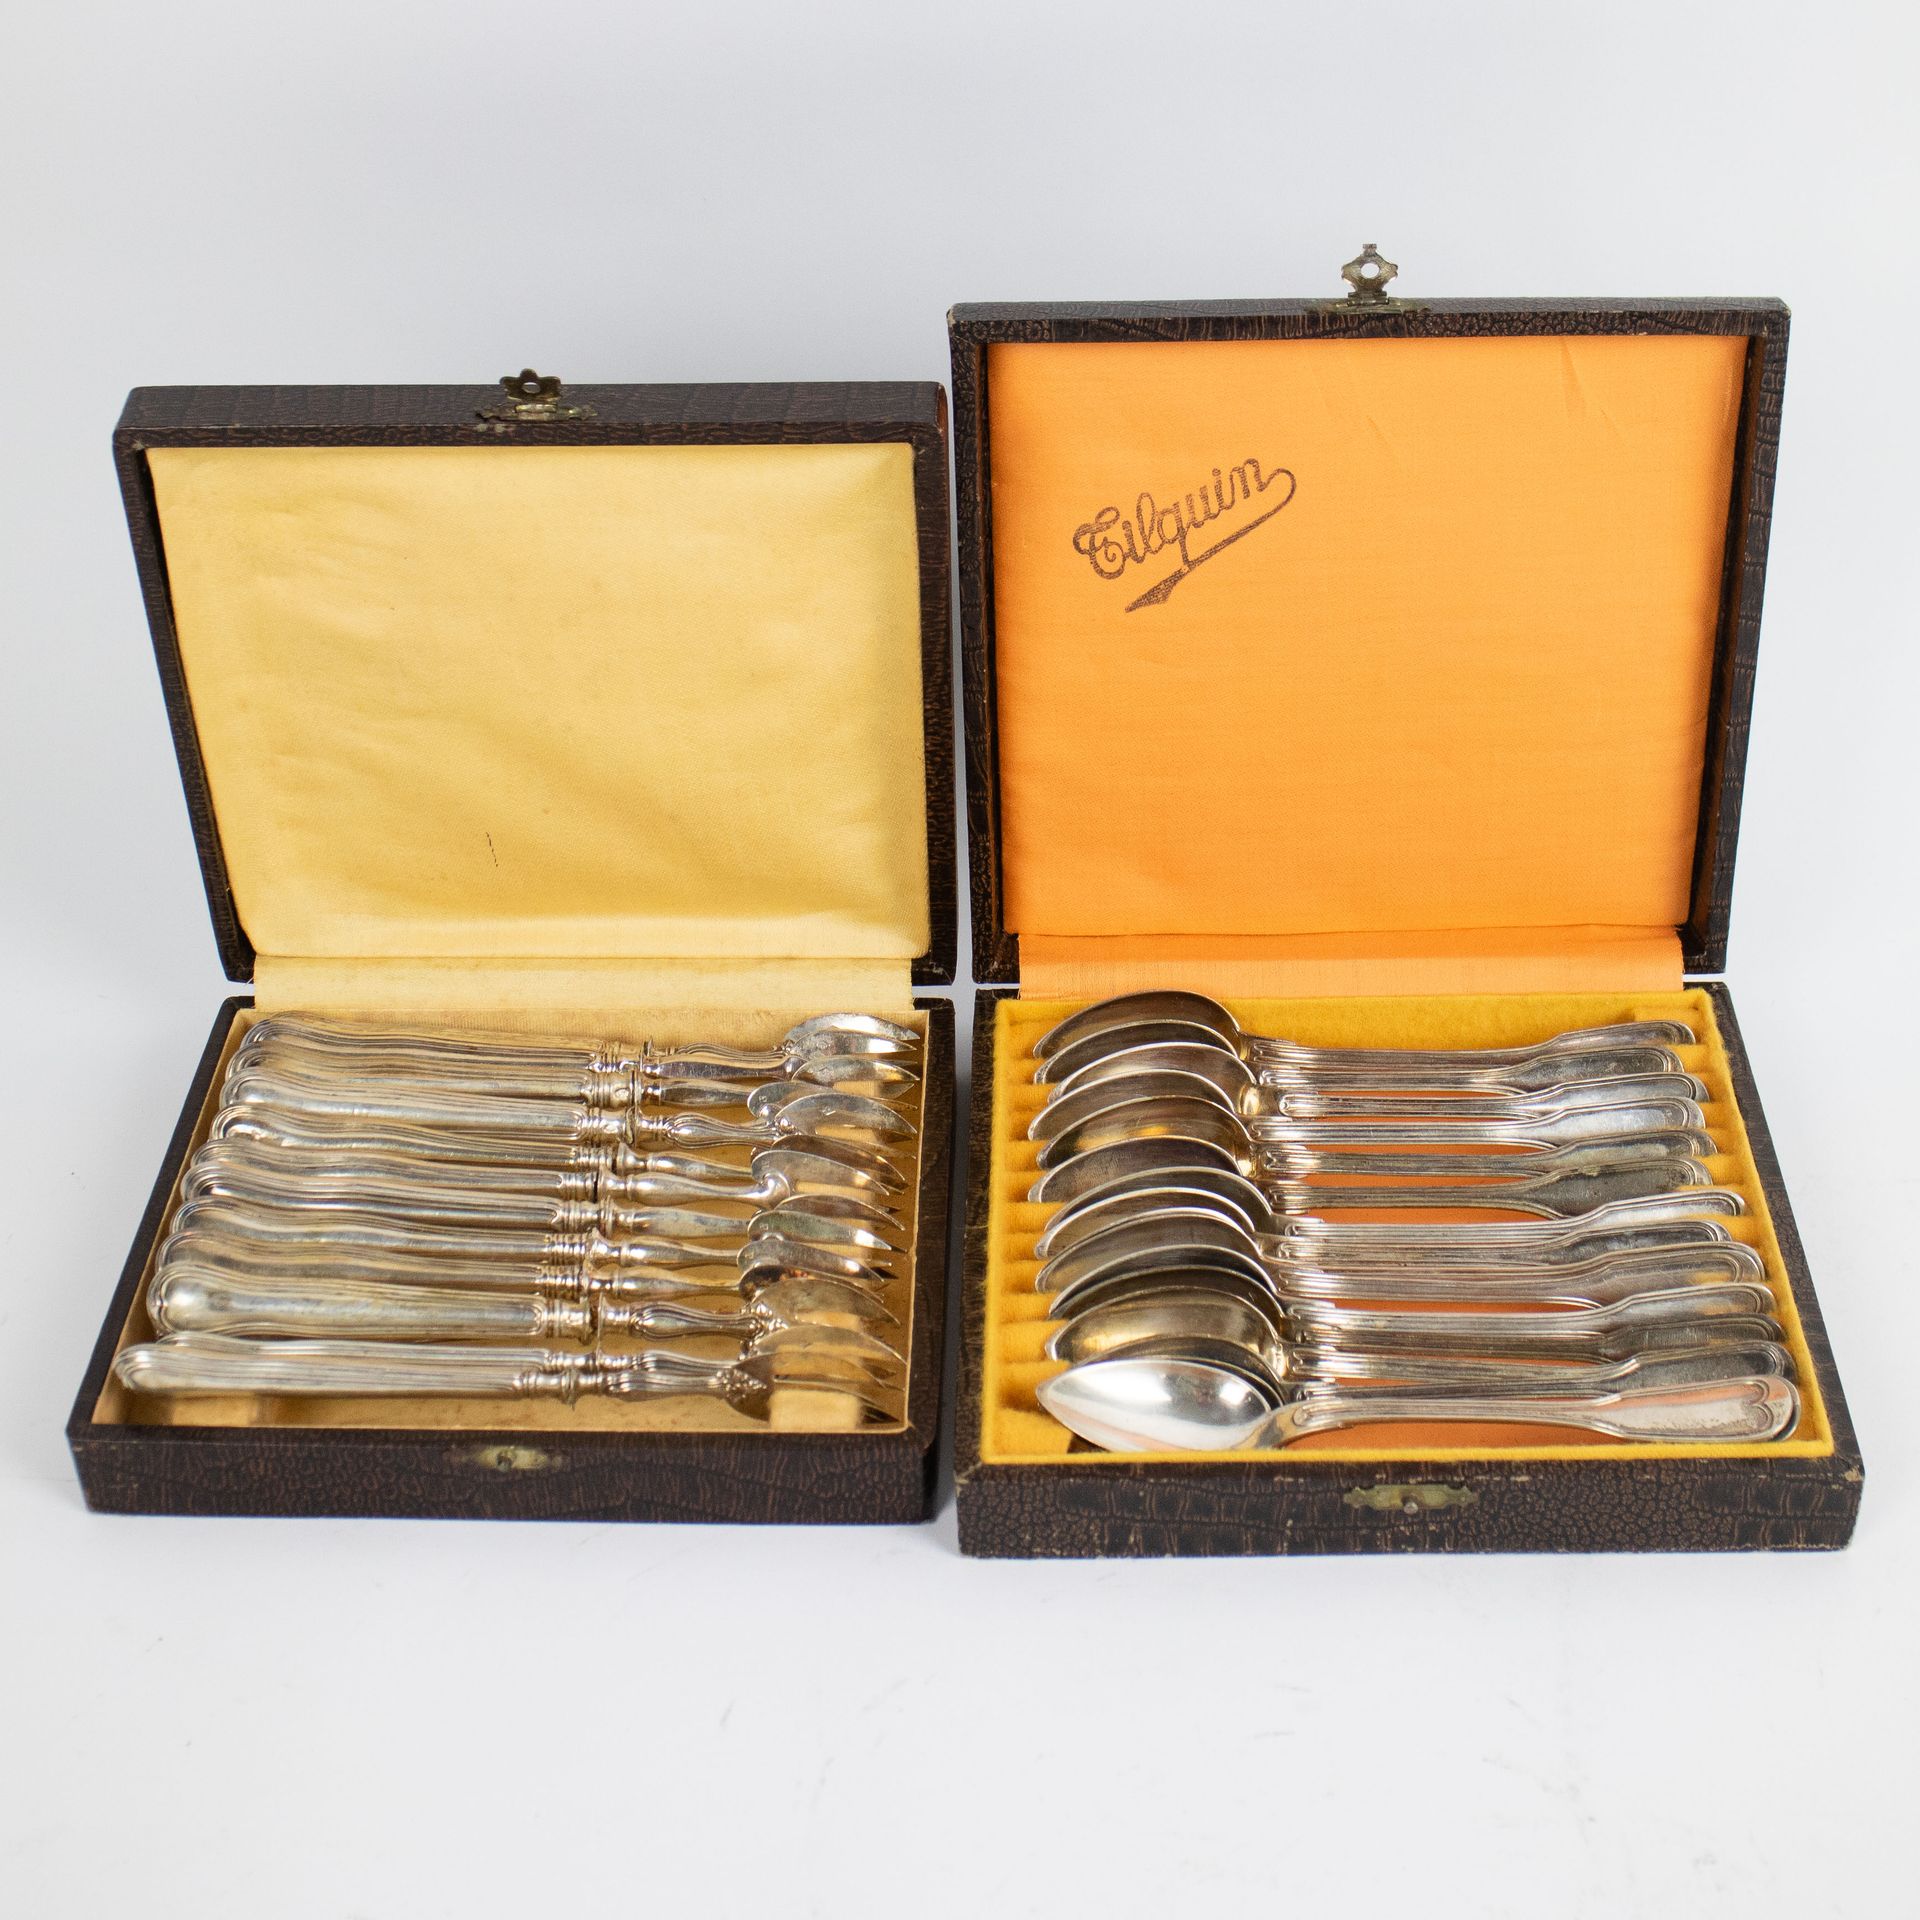 14 forks and 16 spoons Tilquin and a silvered tray with 6 colored glasses Silber&hellip;